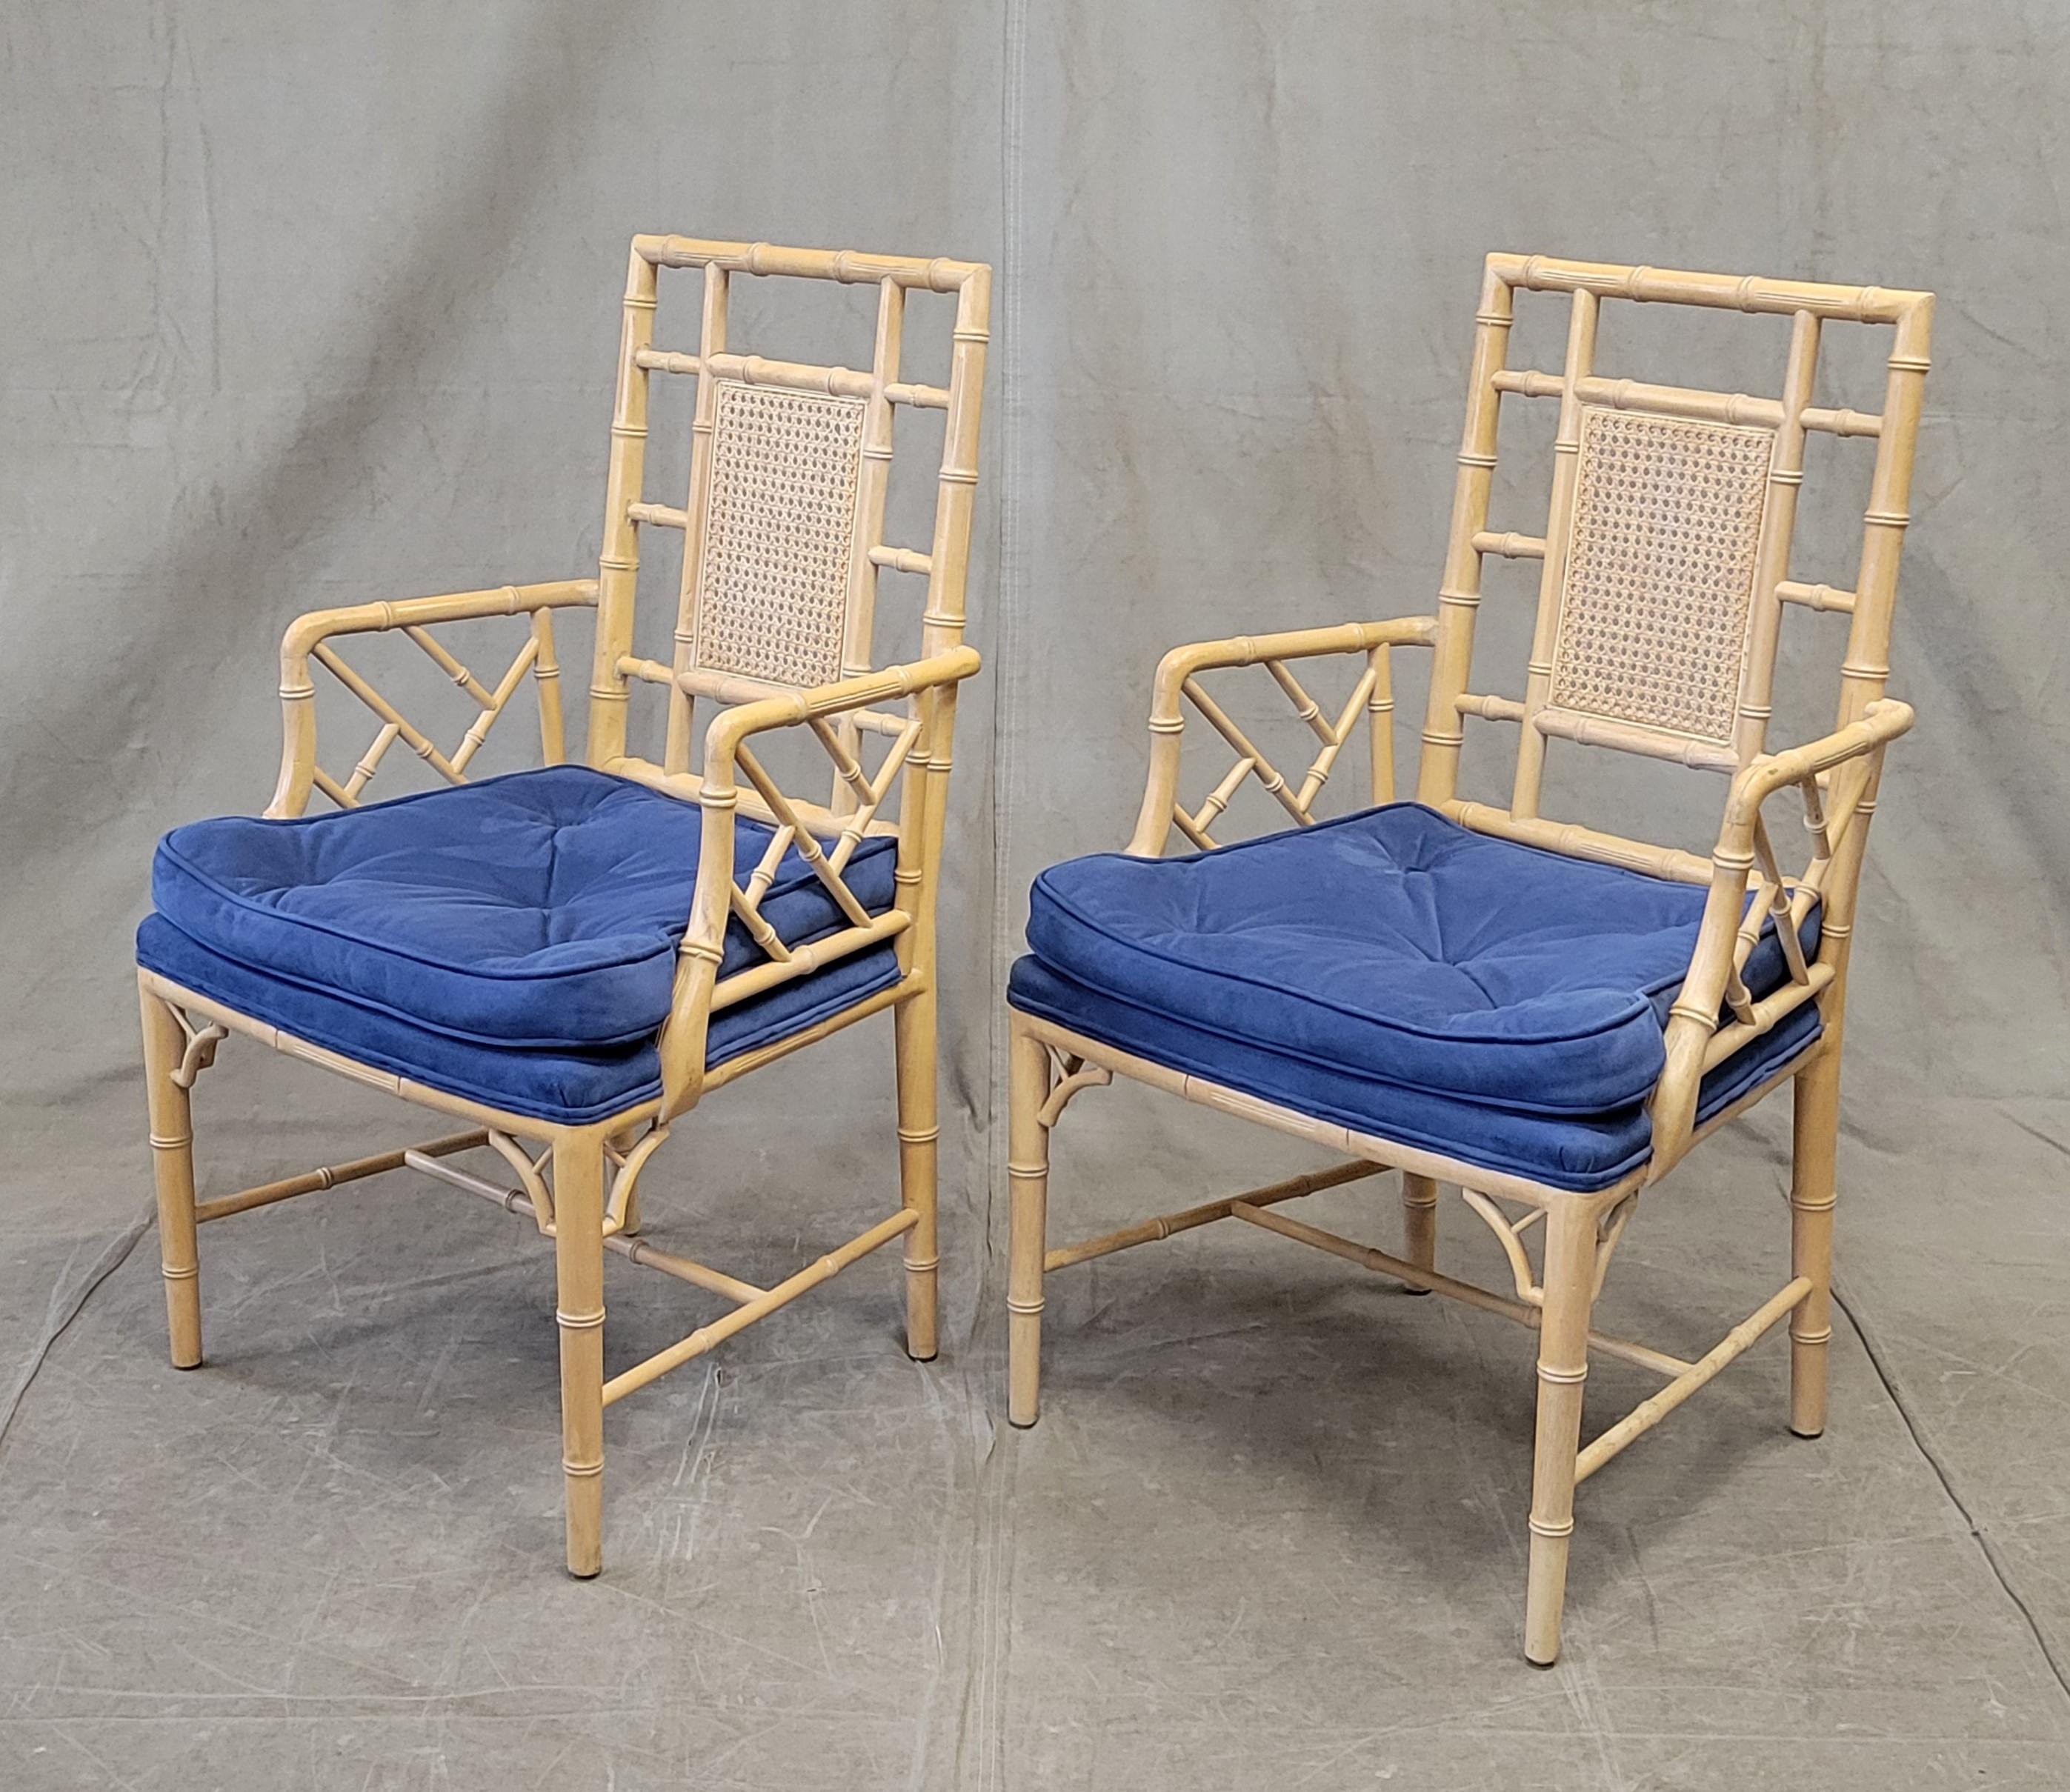 A charming and functional pair of vintage faux bamboo armchairs with tufted blue microsuede seat cushions. The wood was skillfully carved and finished to resemble bamboo and the cane back is intact and strong. Slight wear from contact with water on